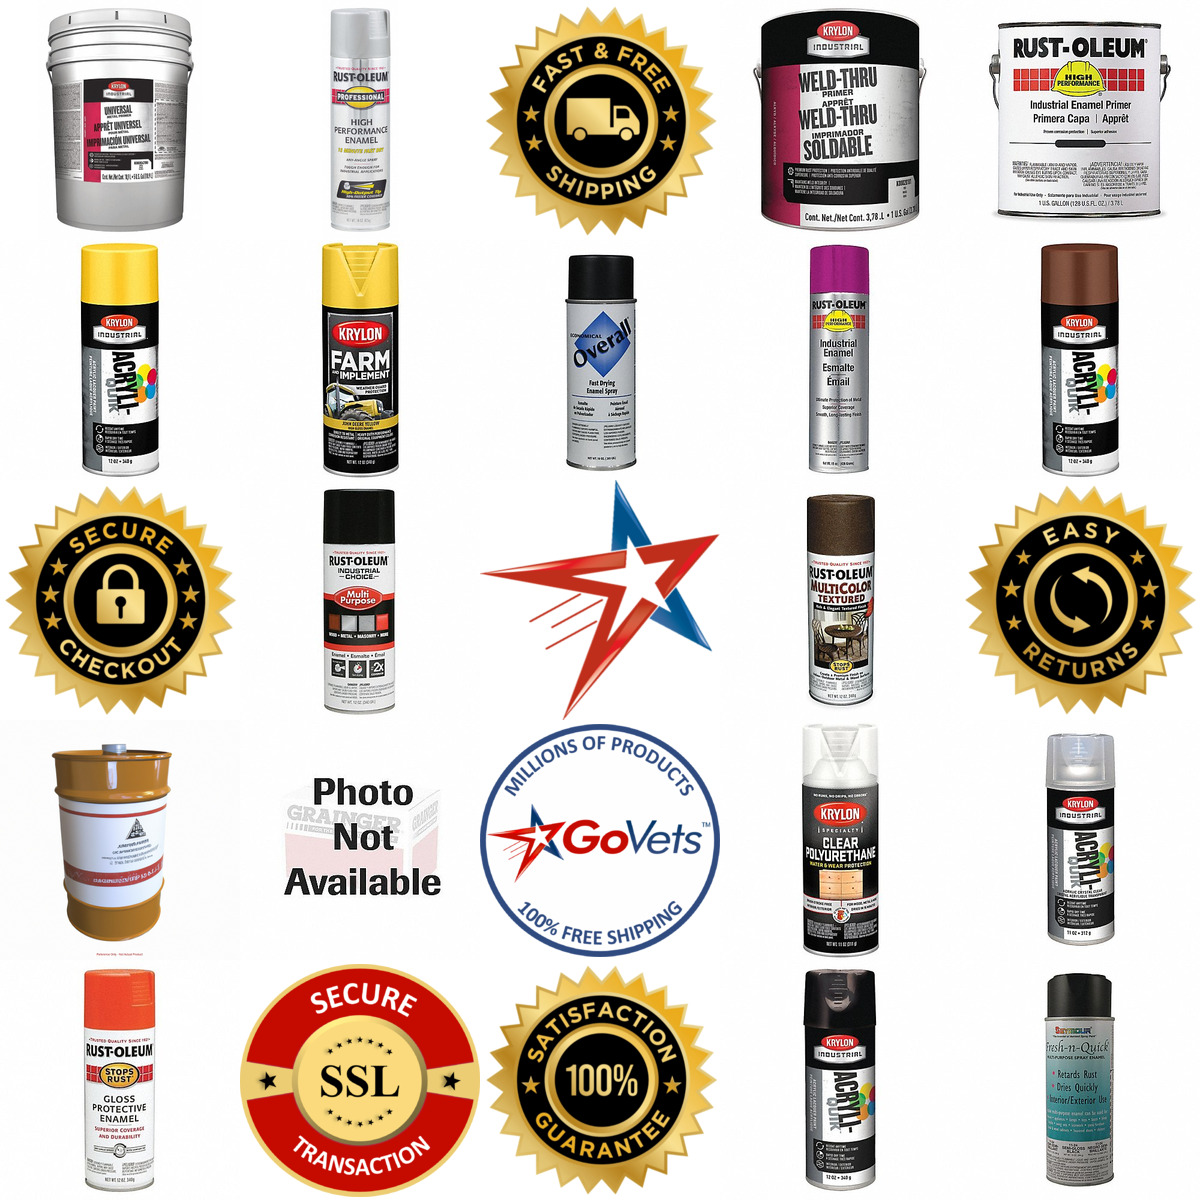 A selection of Spray Paints and Primers products on GoVets